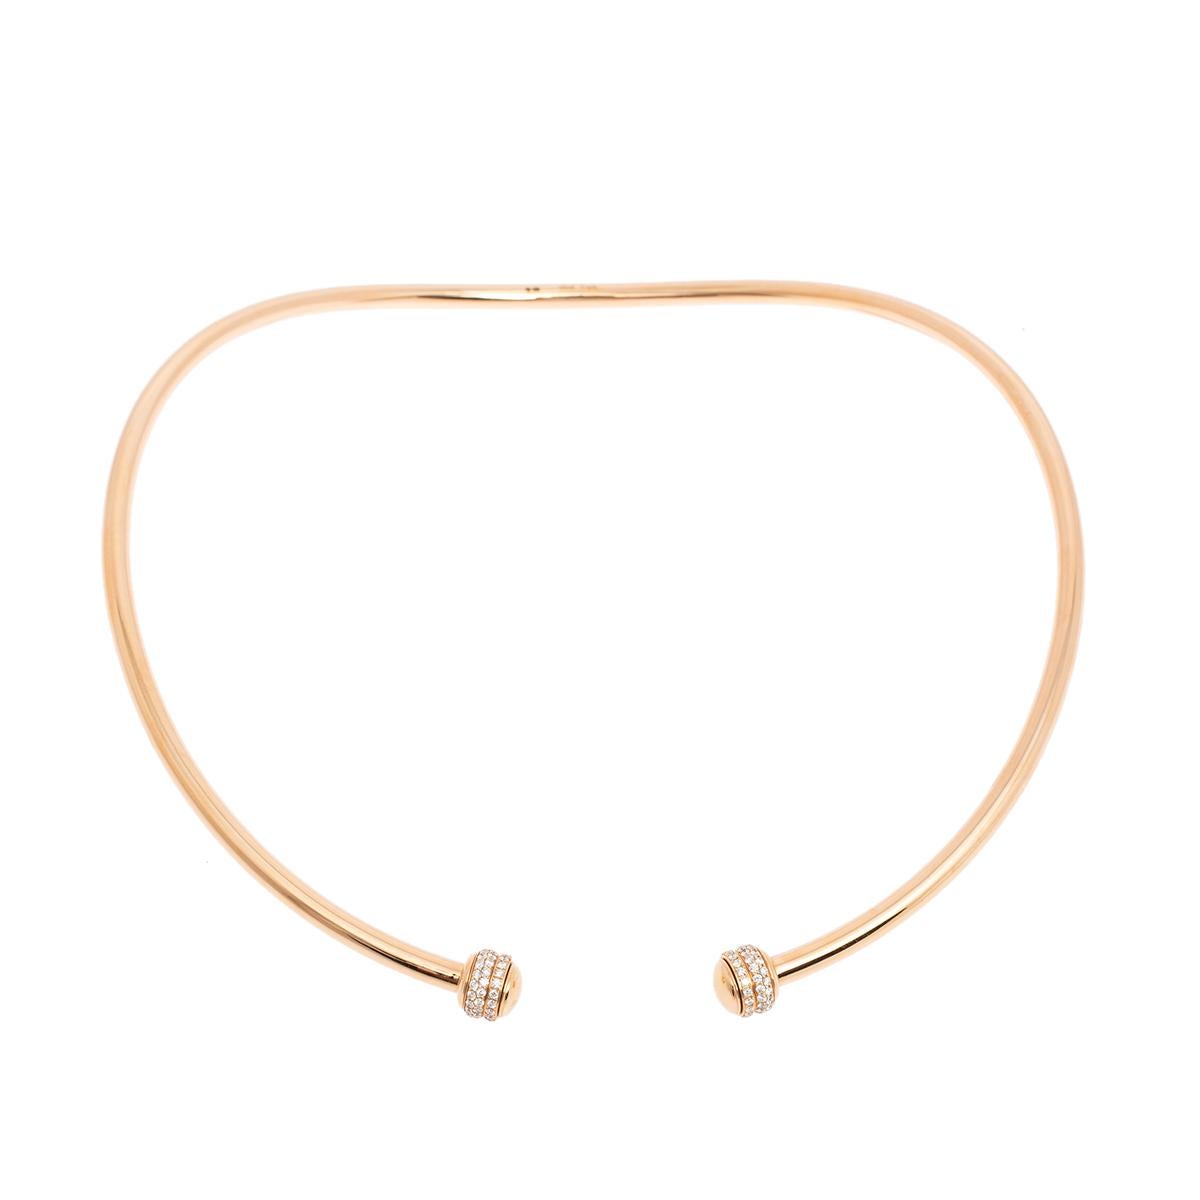 Show your love for fine artistry and luxury accessories with this stunning necklace from Piaget that is made from 18k rose gold. One of the most popular collections from Piaget is their Possession collection which is defined by rotating rings. The